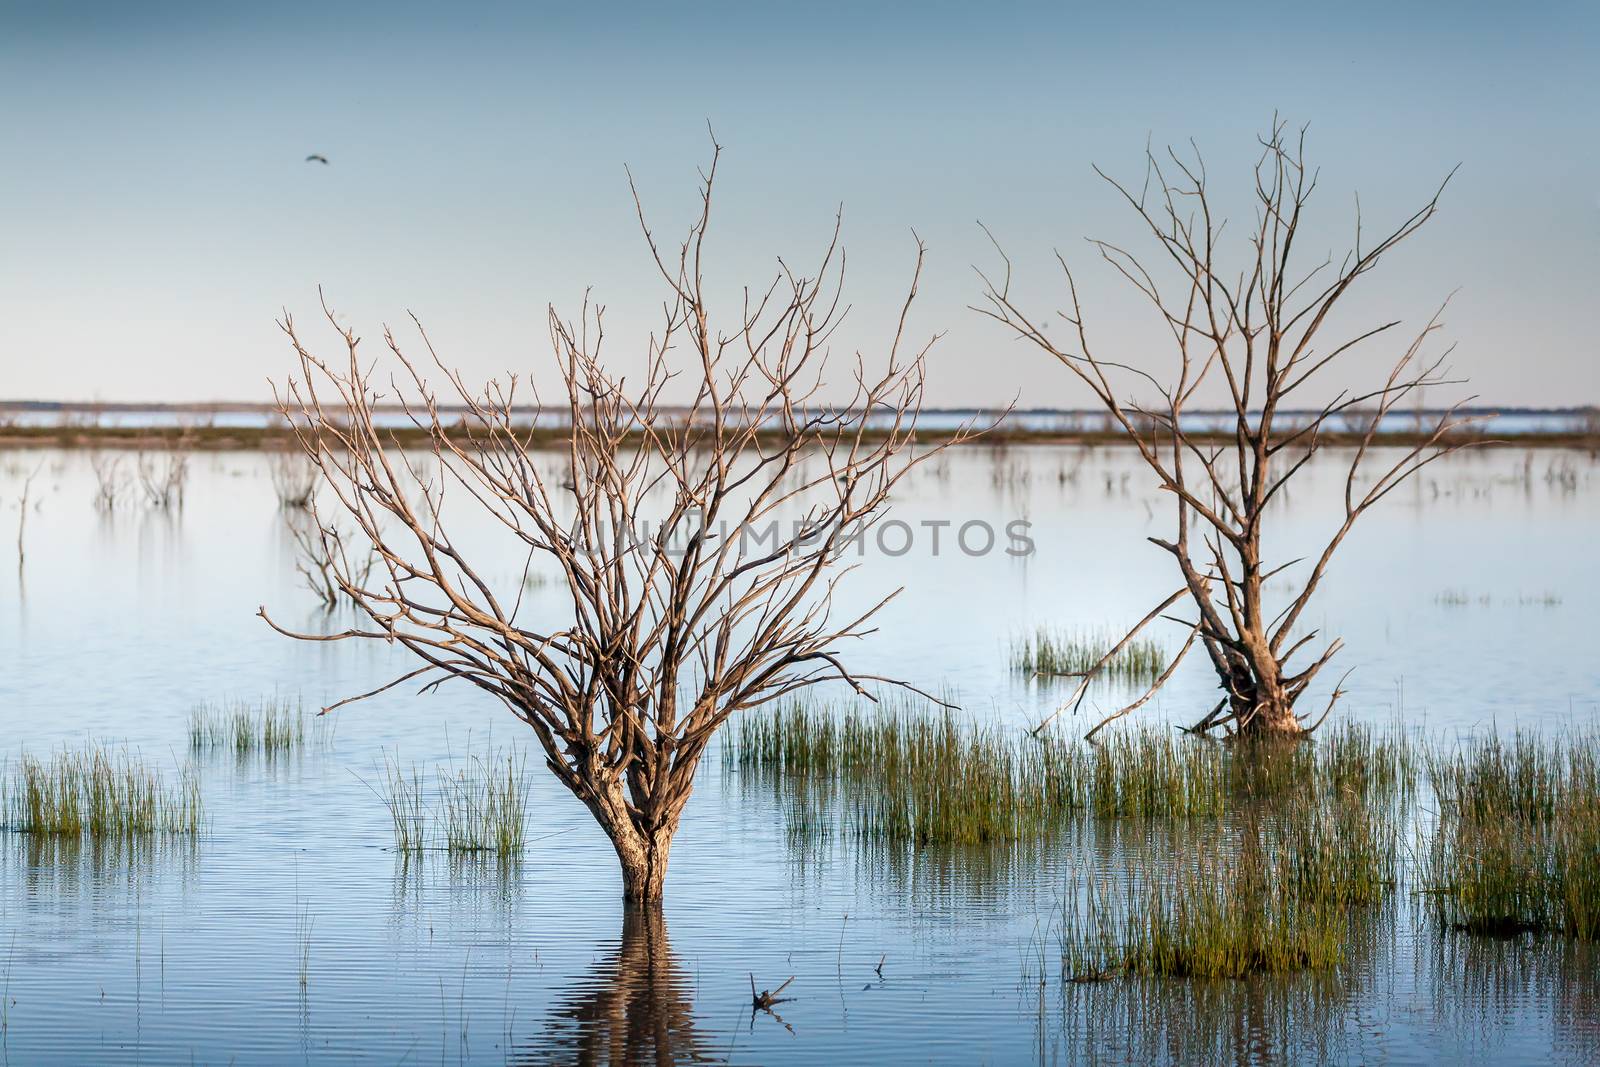 Trees and grasses swamped in outback lake oasis by lovleah